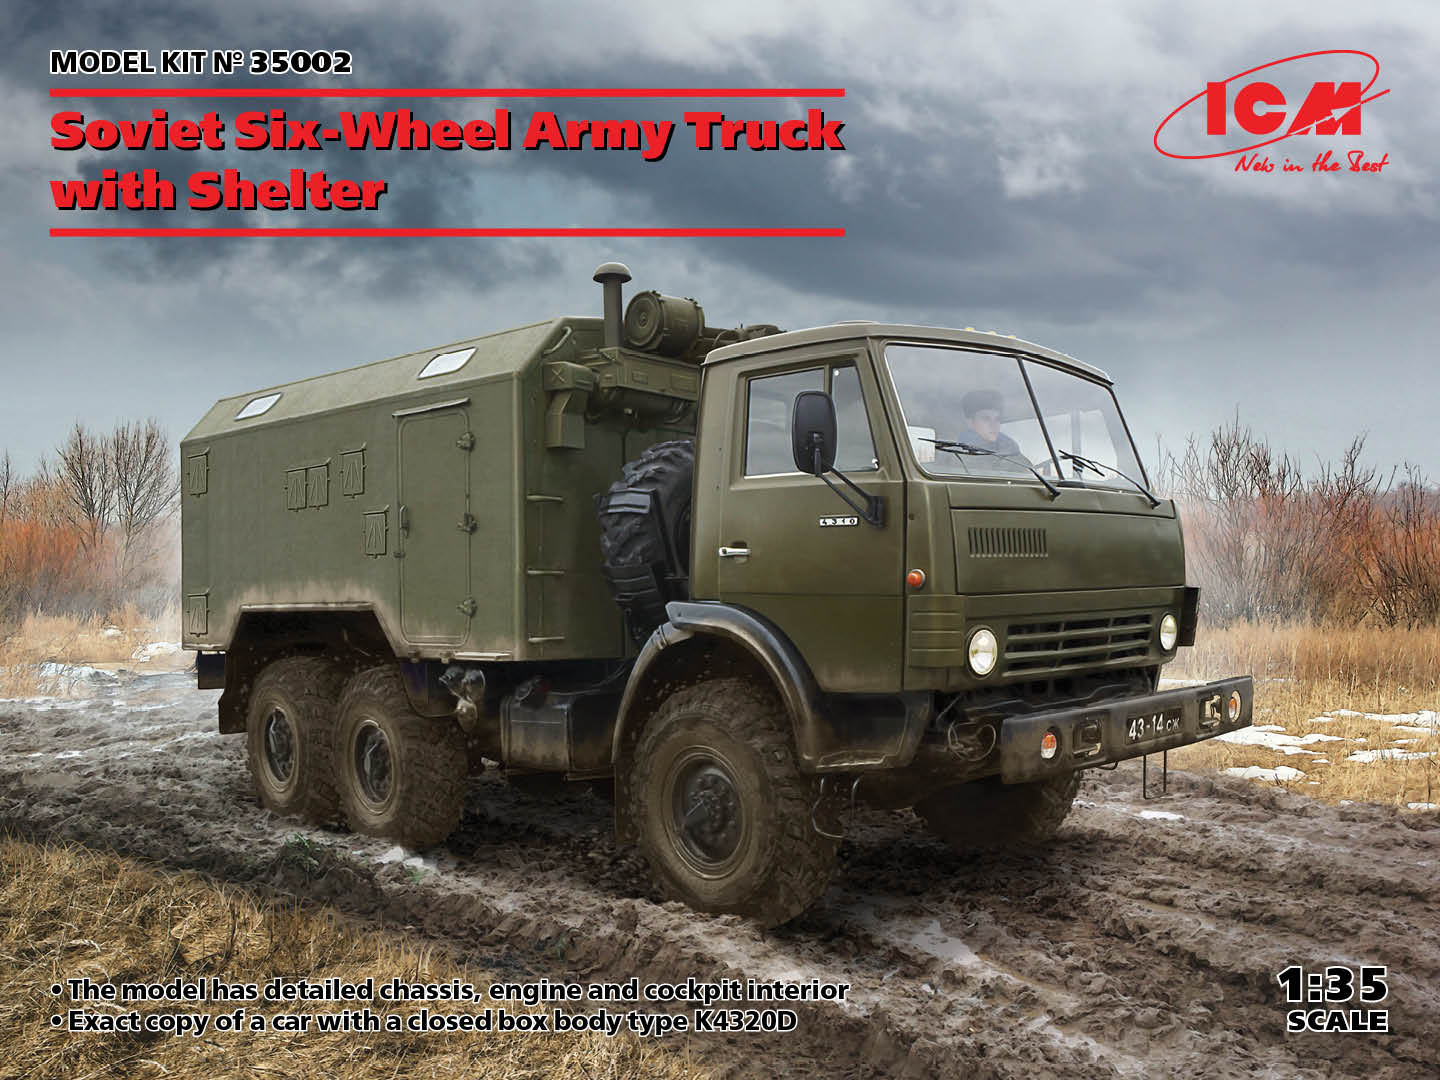 Soviet Six-Wheel Army Truck with Shelter